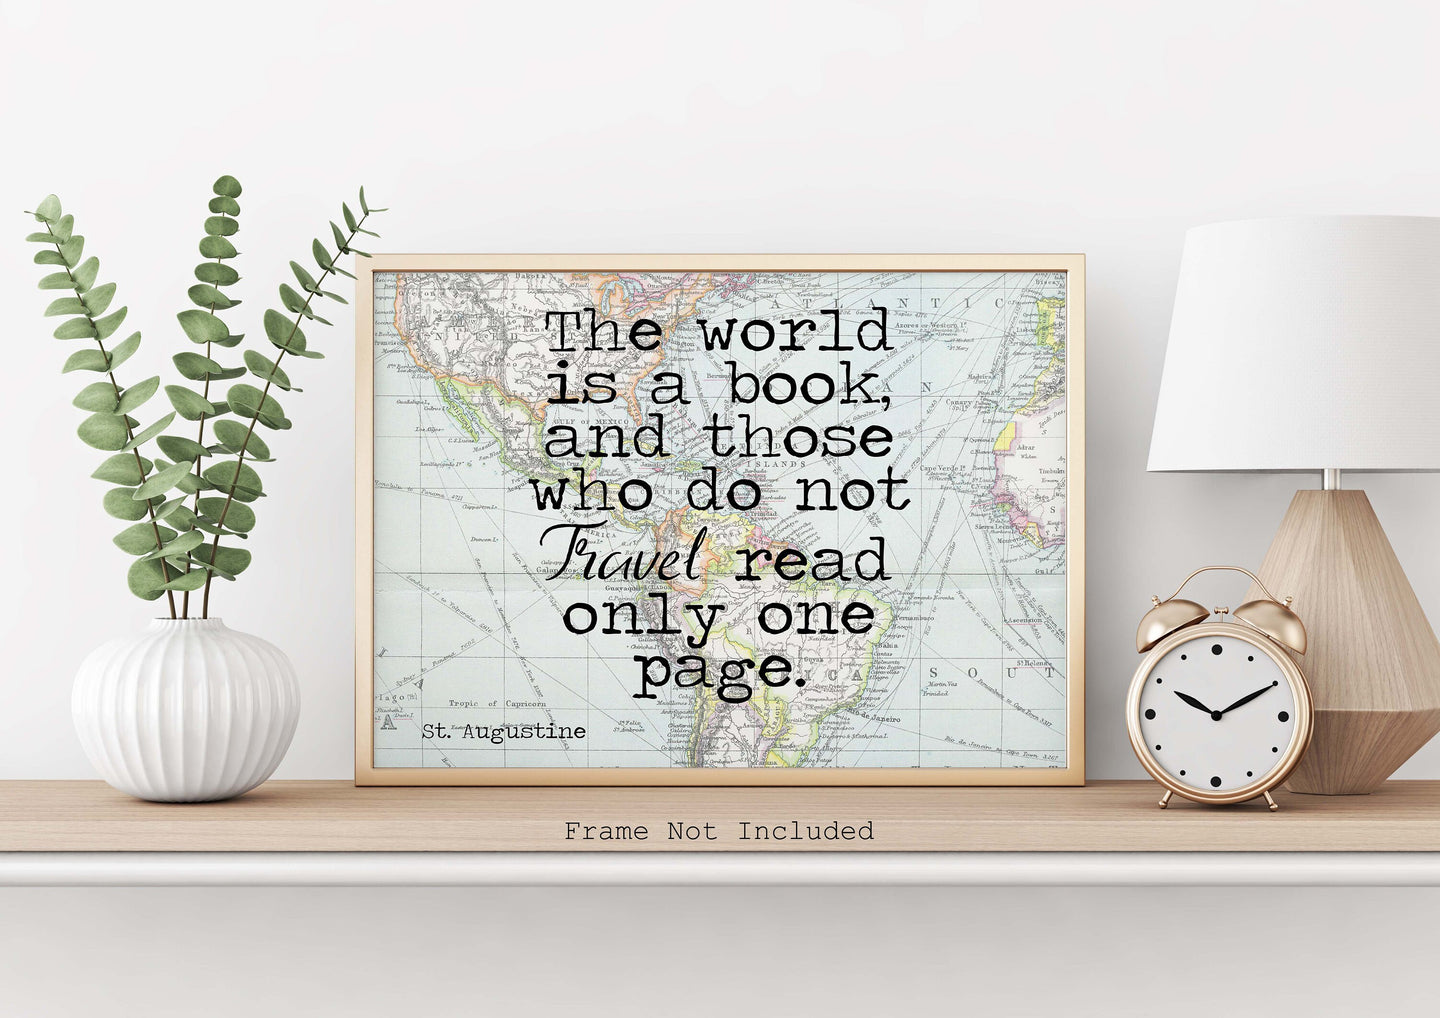 St Augustine Print - The world is a book, and those who do not travel read only one page - Unframed Travel Poster for Home UNFRAMED